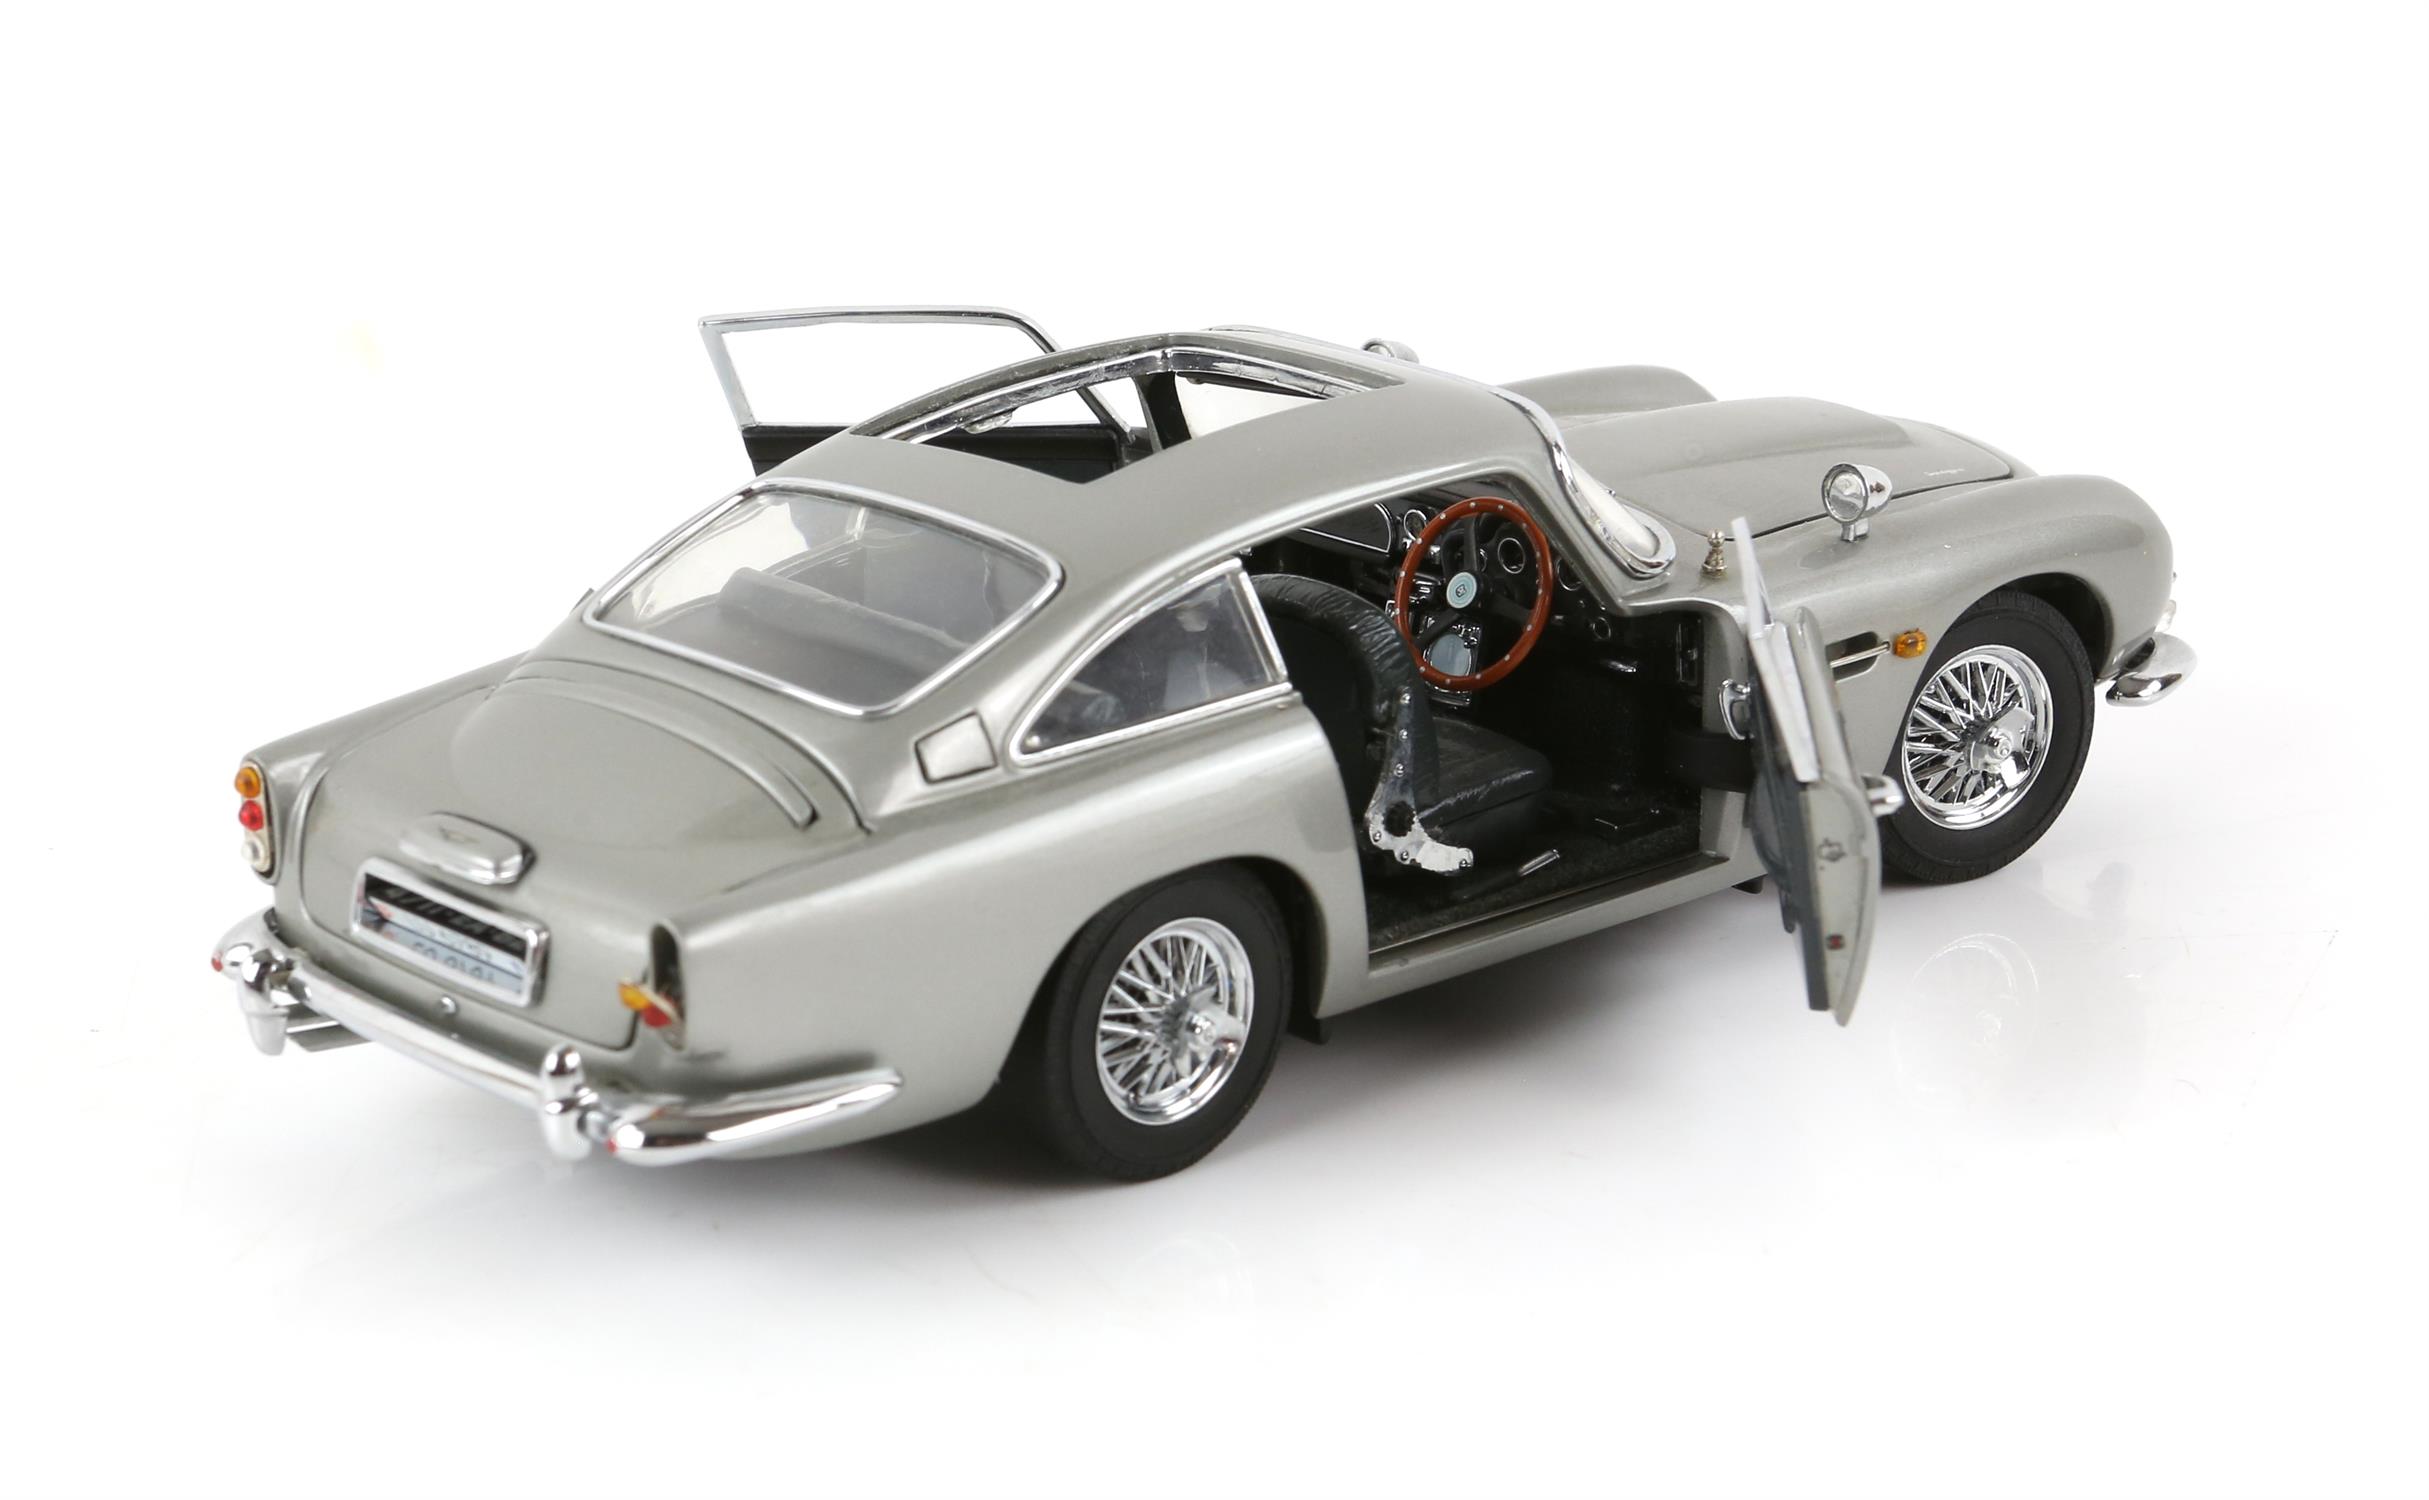 James Bond 007 - Danbury Mint Aston Martin DB5, 1:24 scale authorised replica of the car driven by - Image 5 of 5